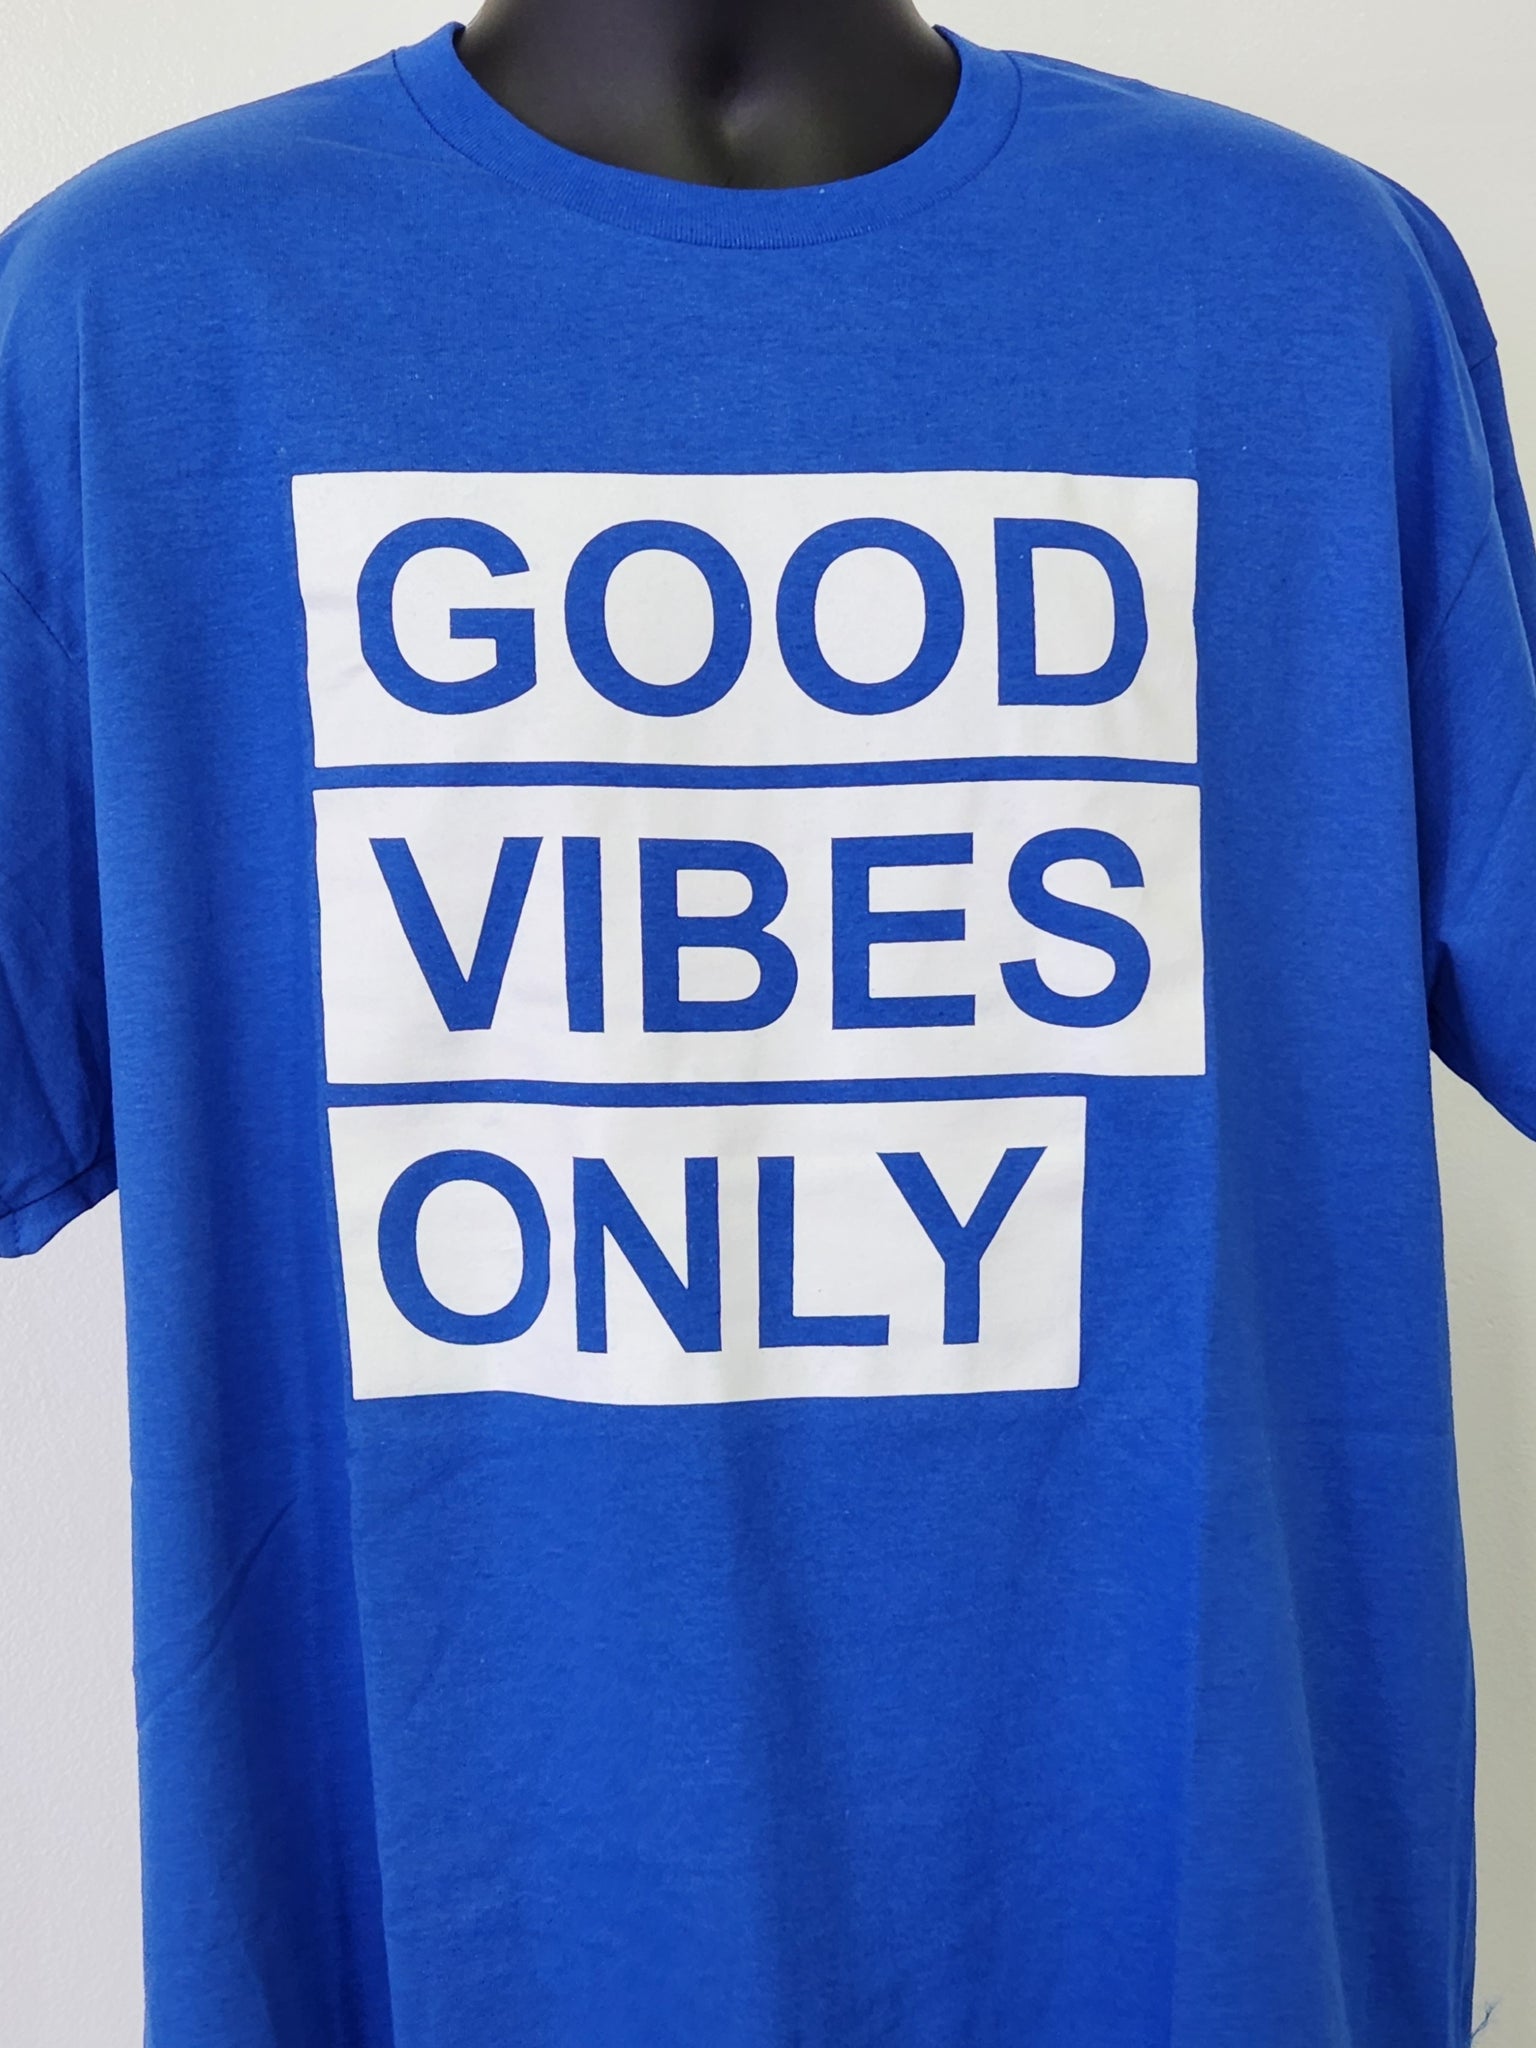 ONLY HATS – N- - SHIRTS T- GOOD VIBES JUST